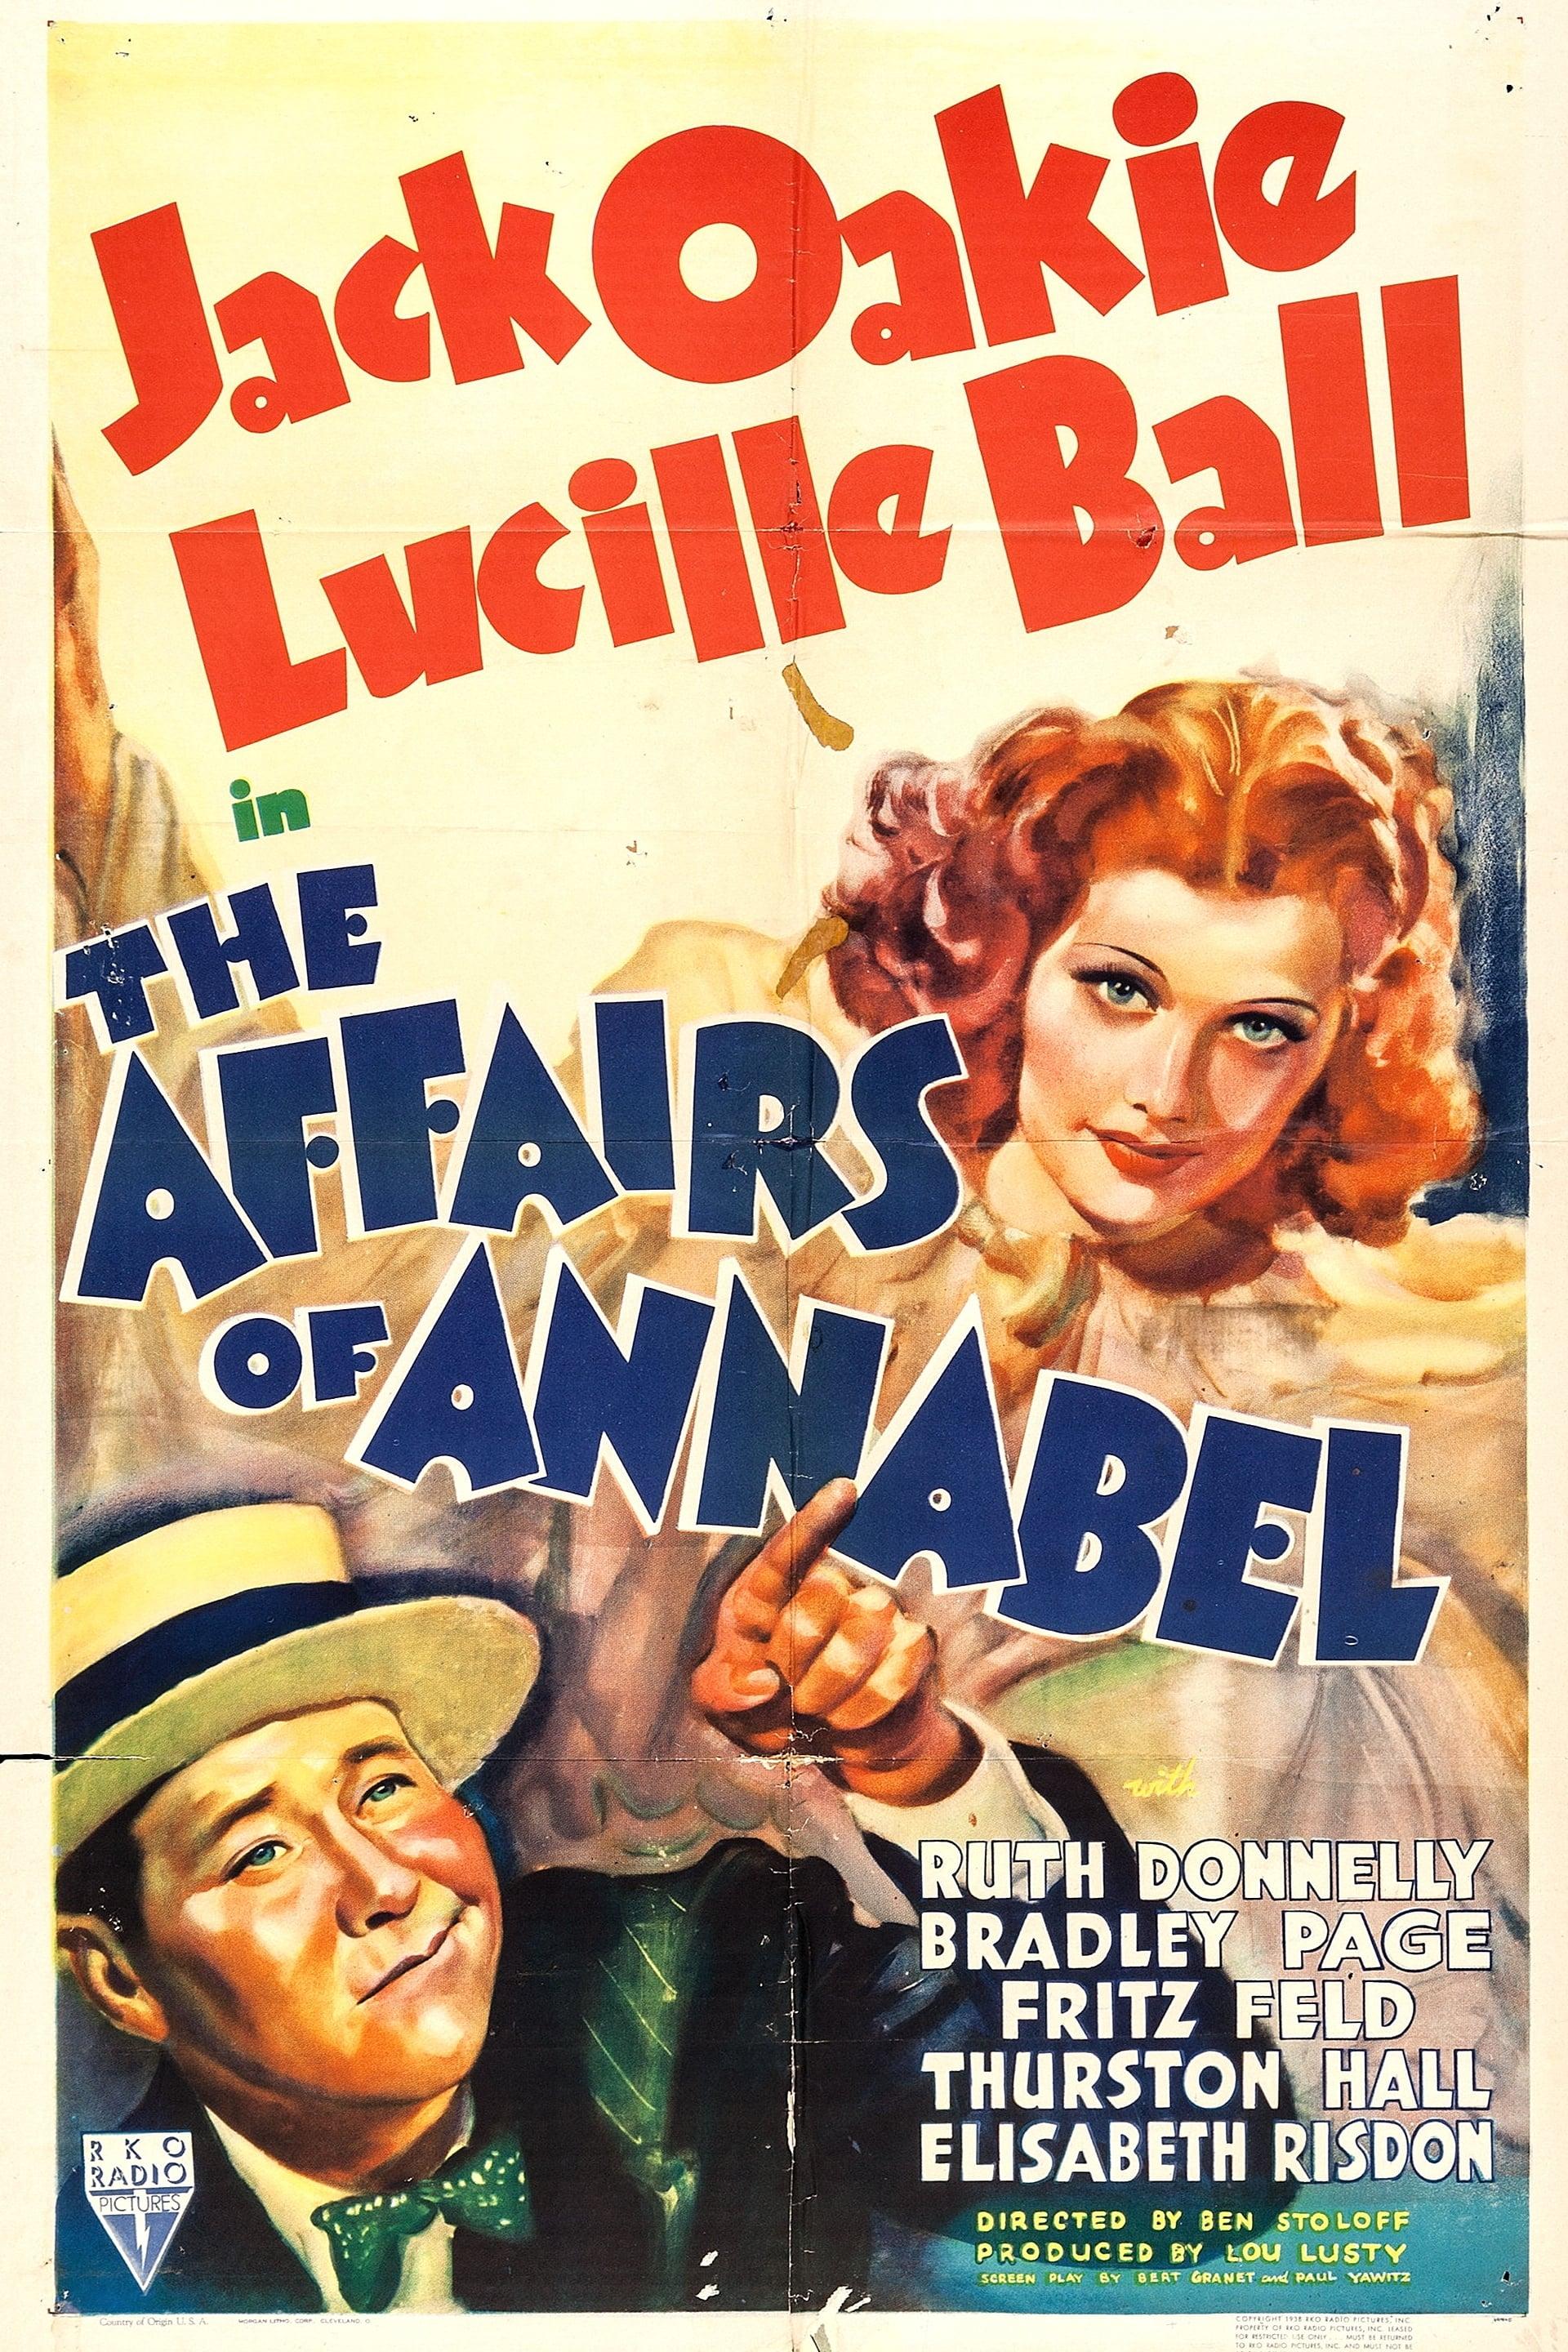 The Affairs of Annabel poster